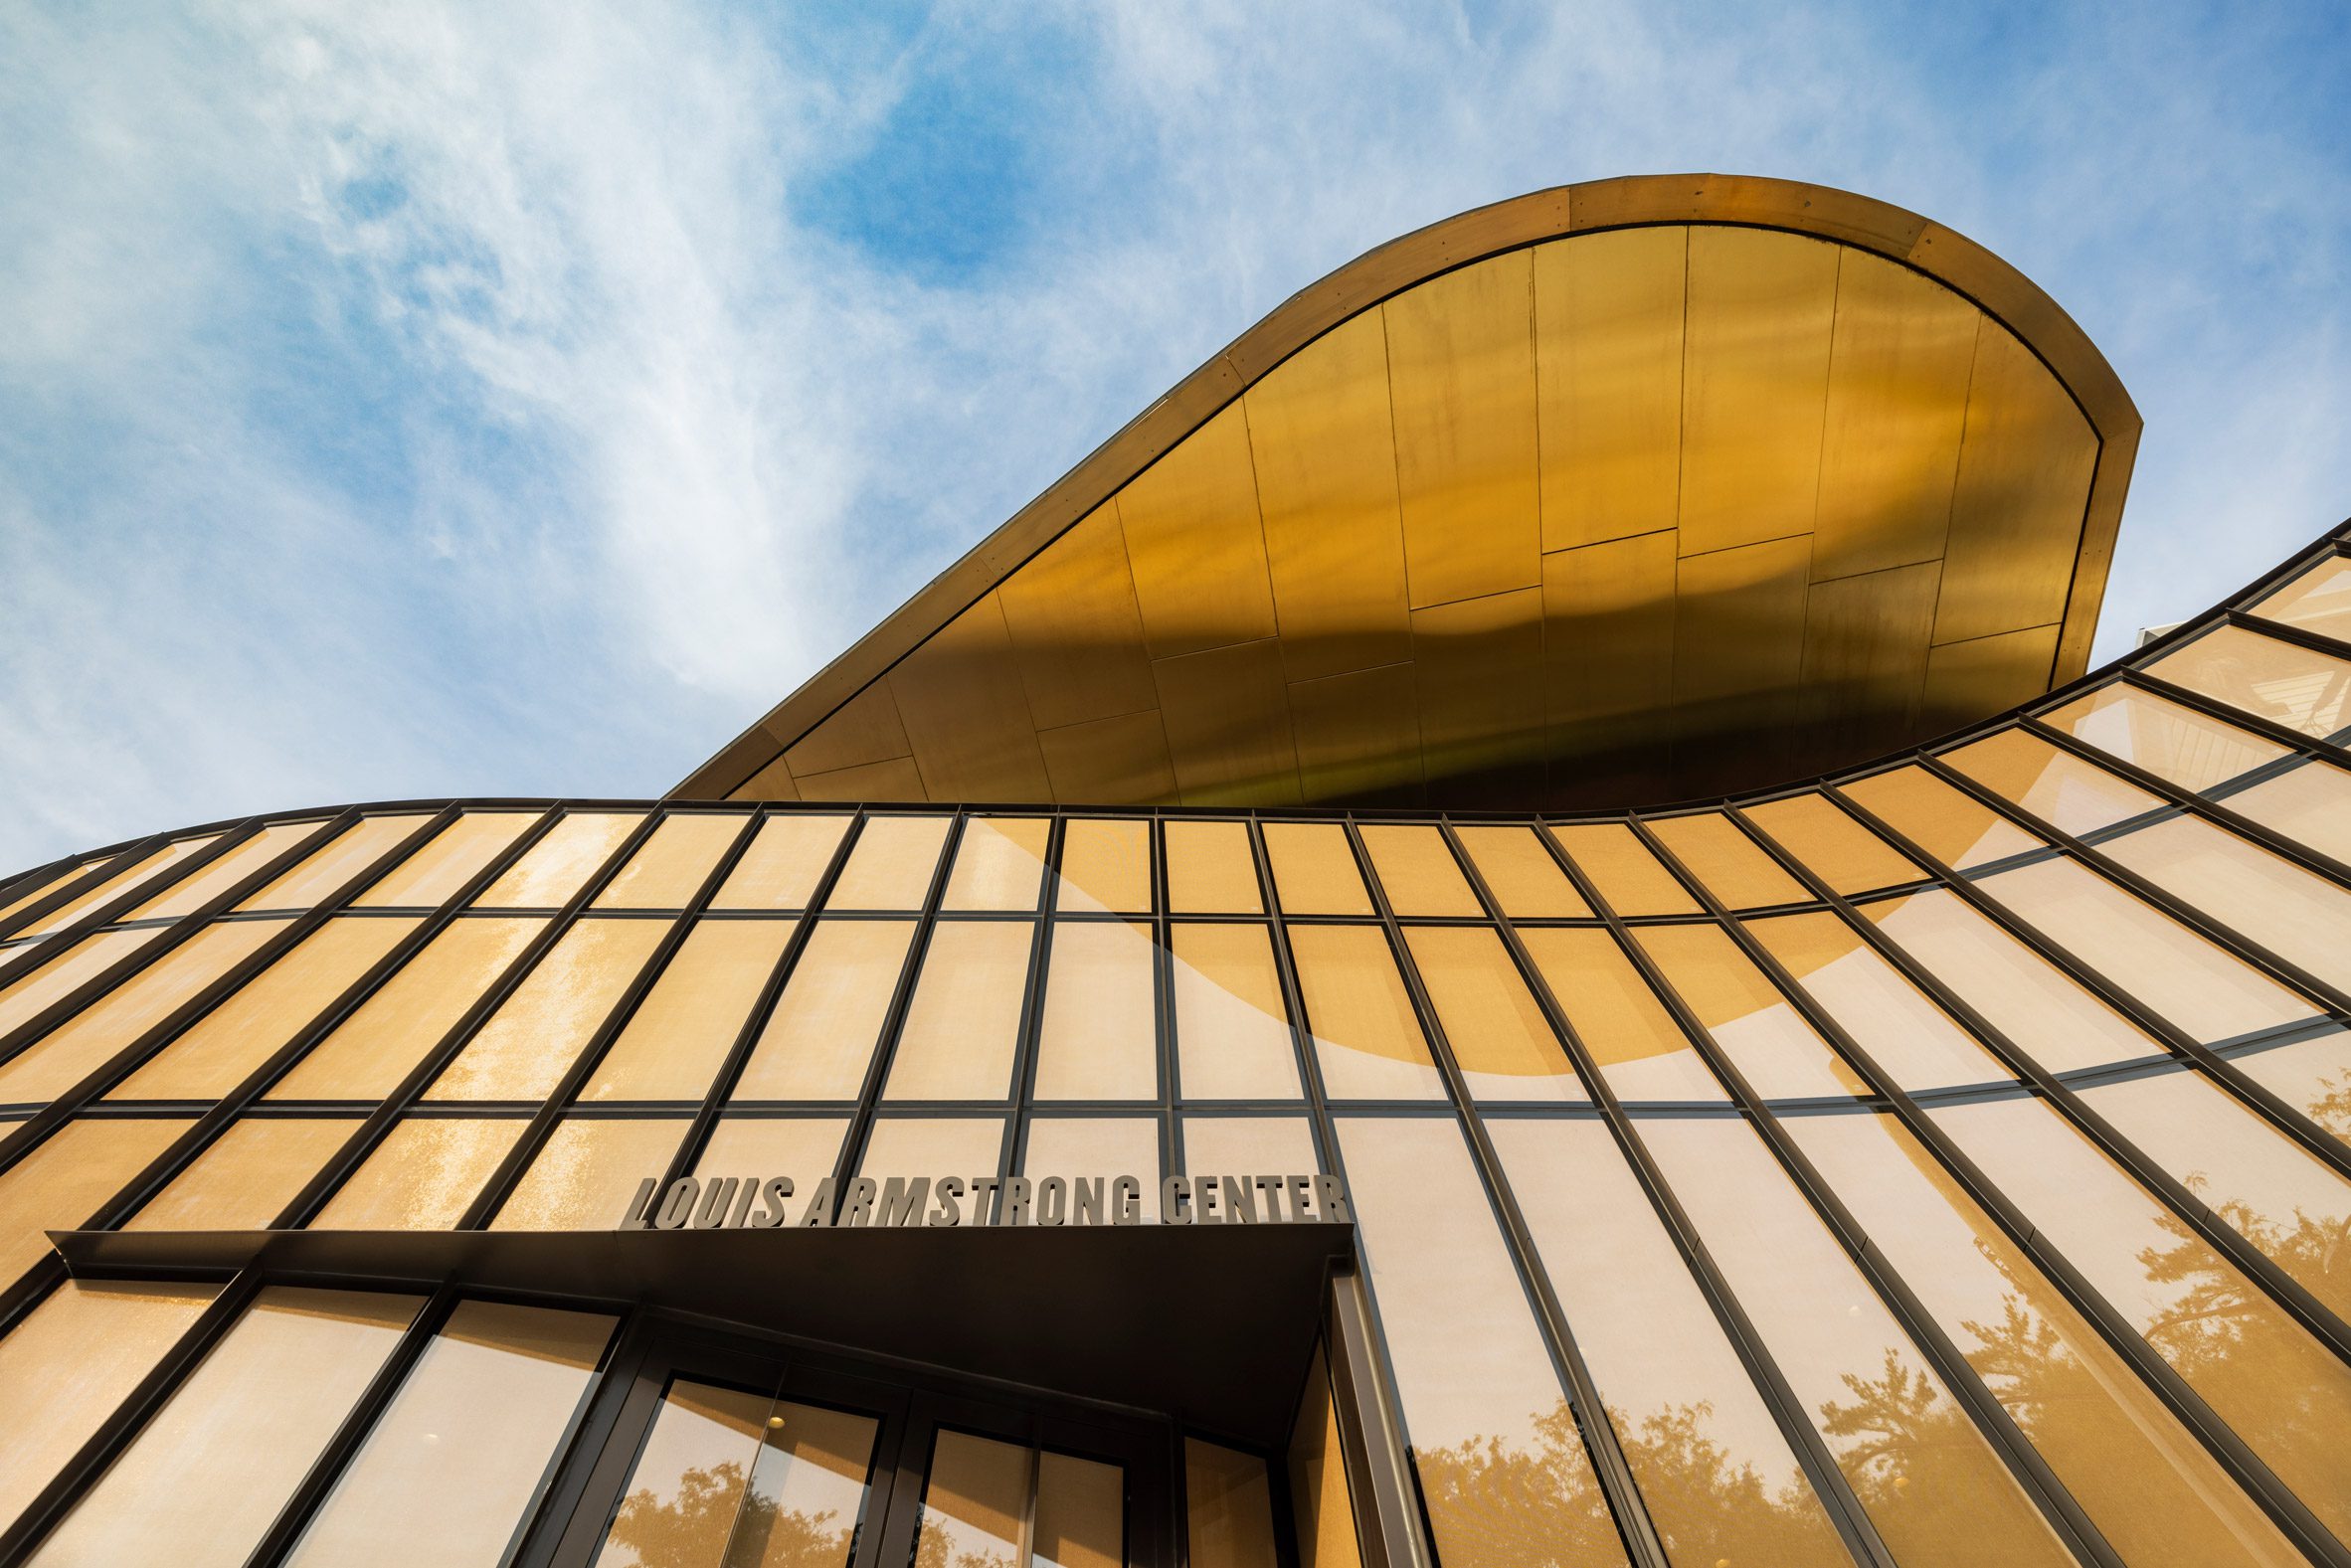 Curved facade on the Louis Armstrong Center